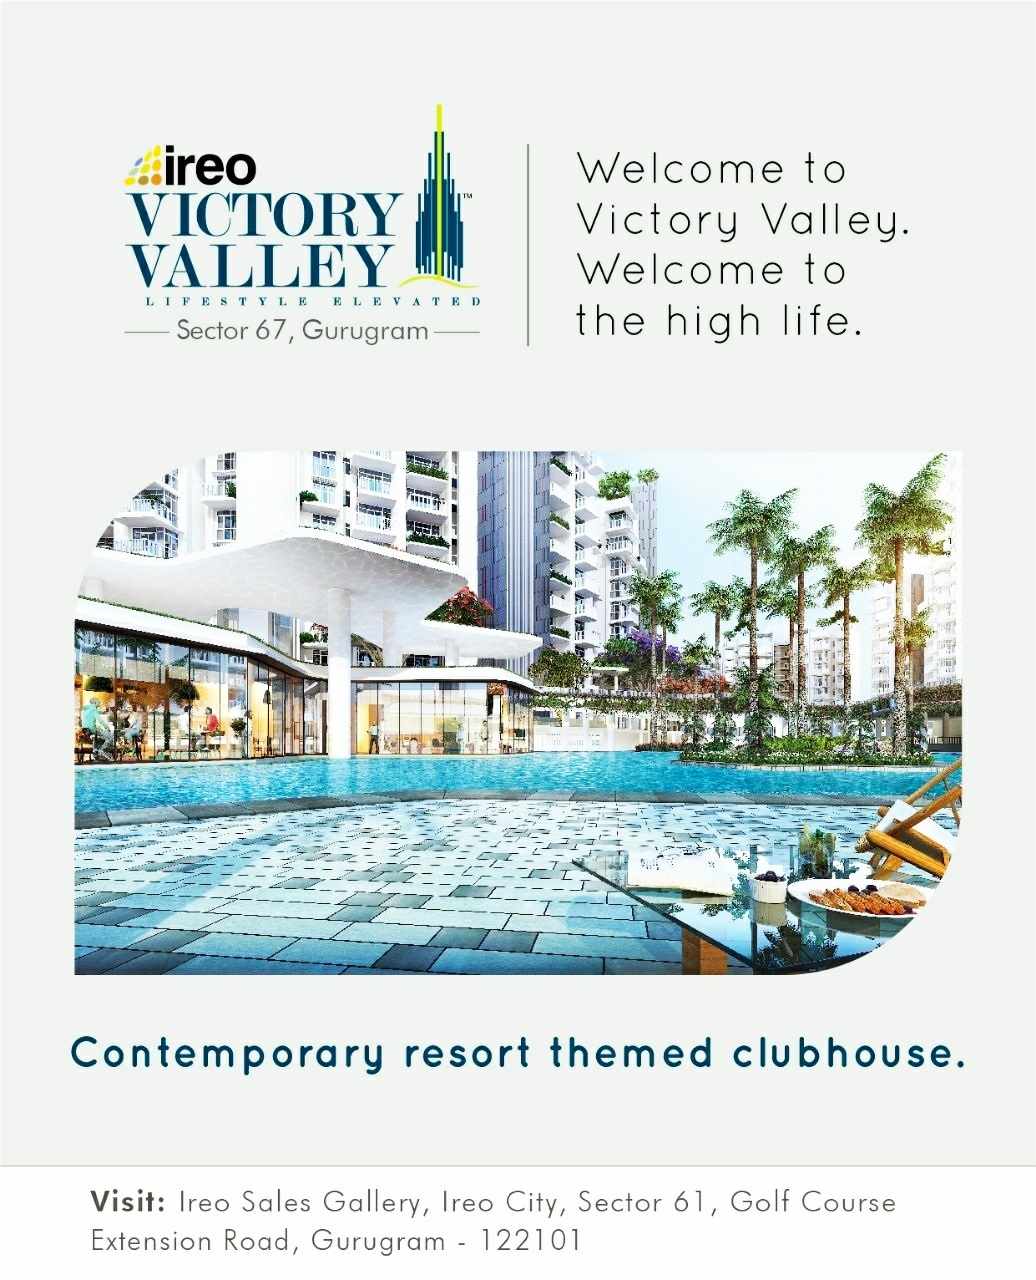 Enjoy in contemporary resort themed clubhouse at Ireo Victory Valley in Gurgaon Update